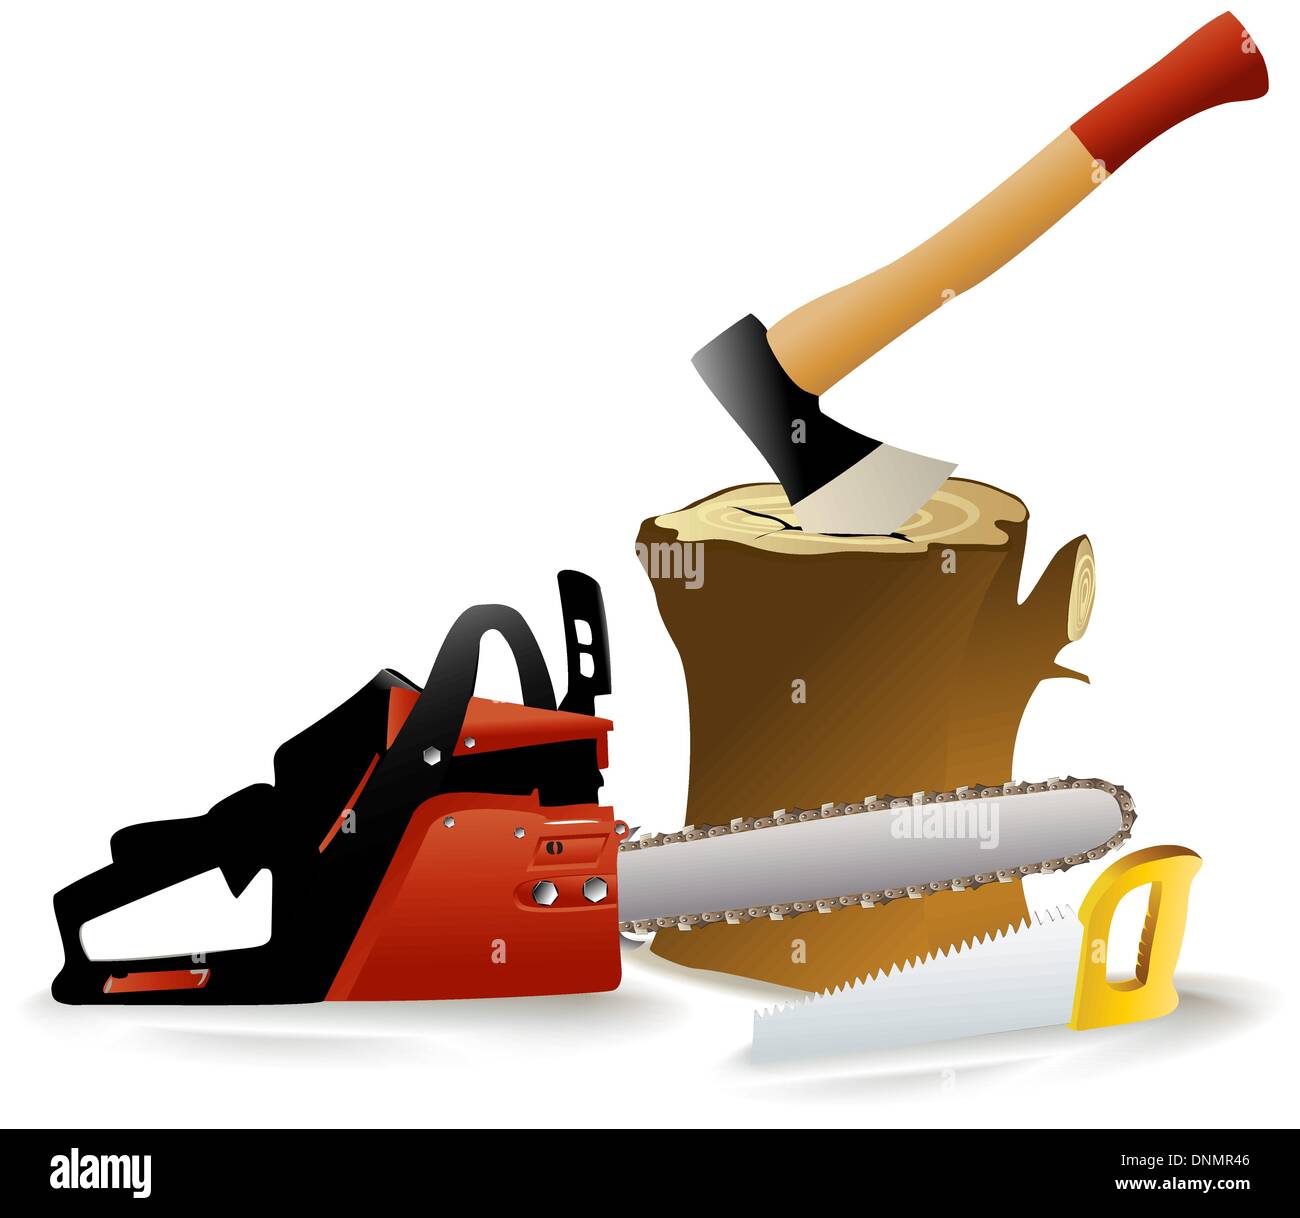 Woodcutter's tools Stock Vector